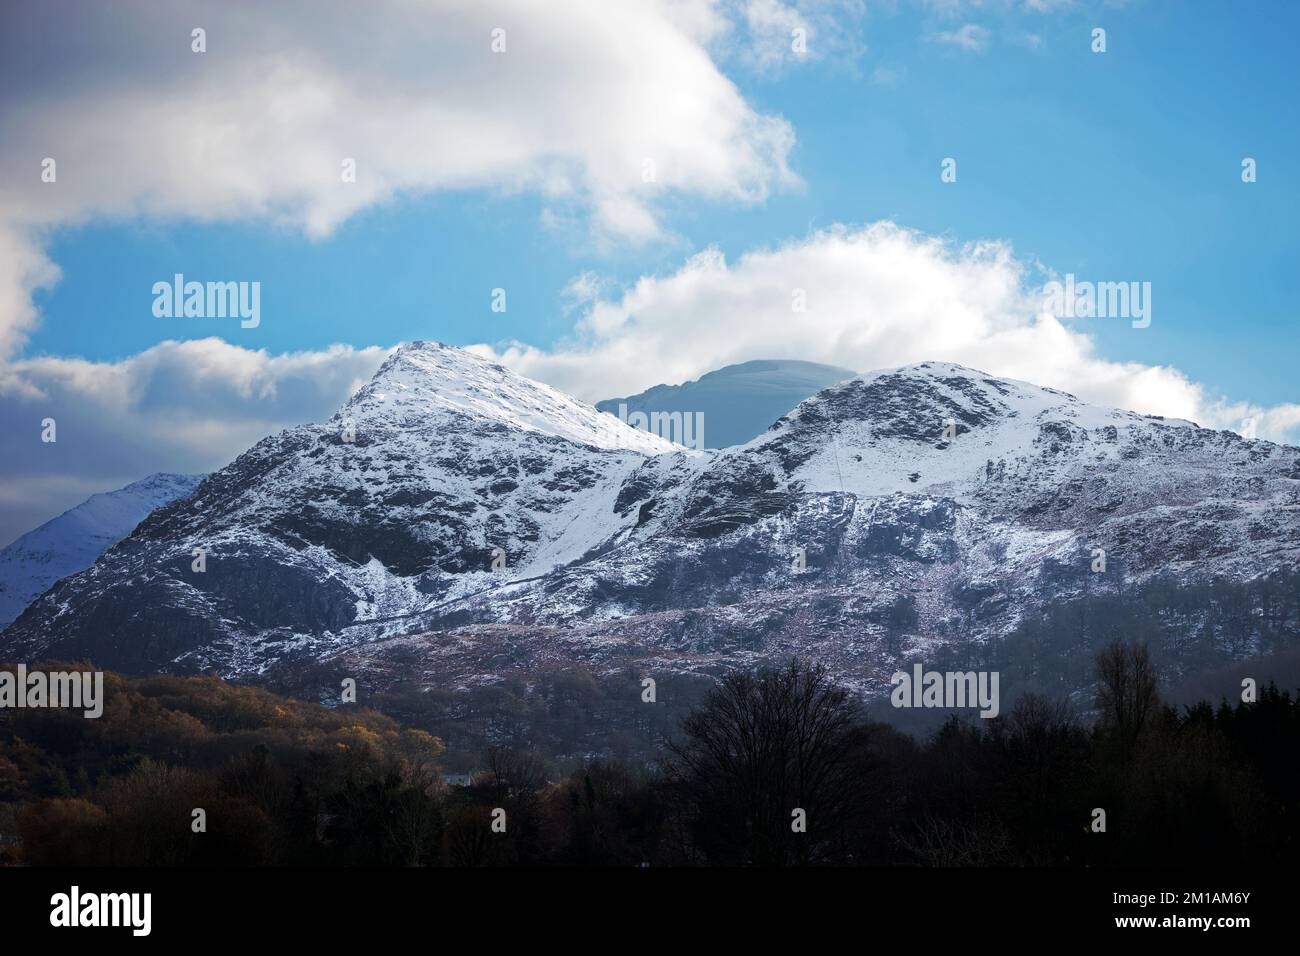 Derlwyn (Y Derlwyn) is a small peak close to mount Snowdon in the Snowdonia National Park. It is here viewed from the village of Llanberis. Stock Photo